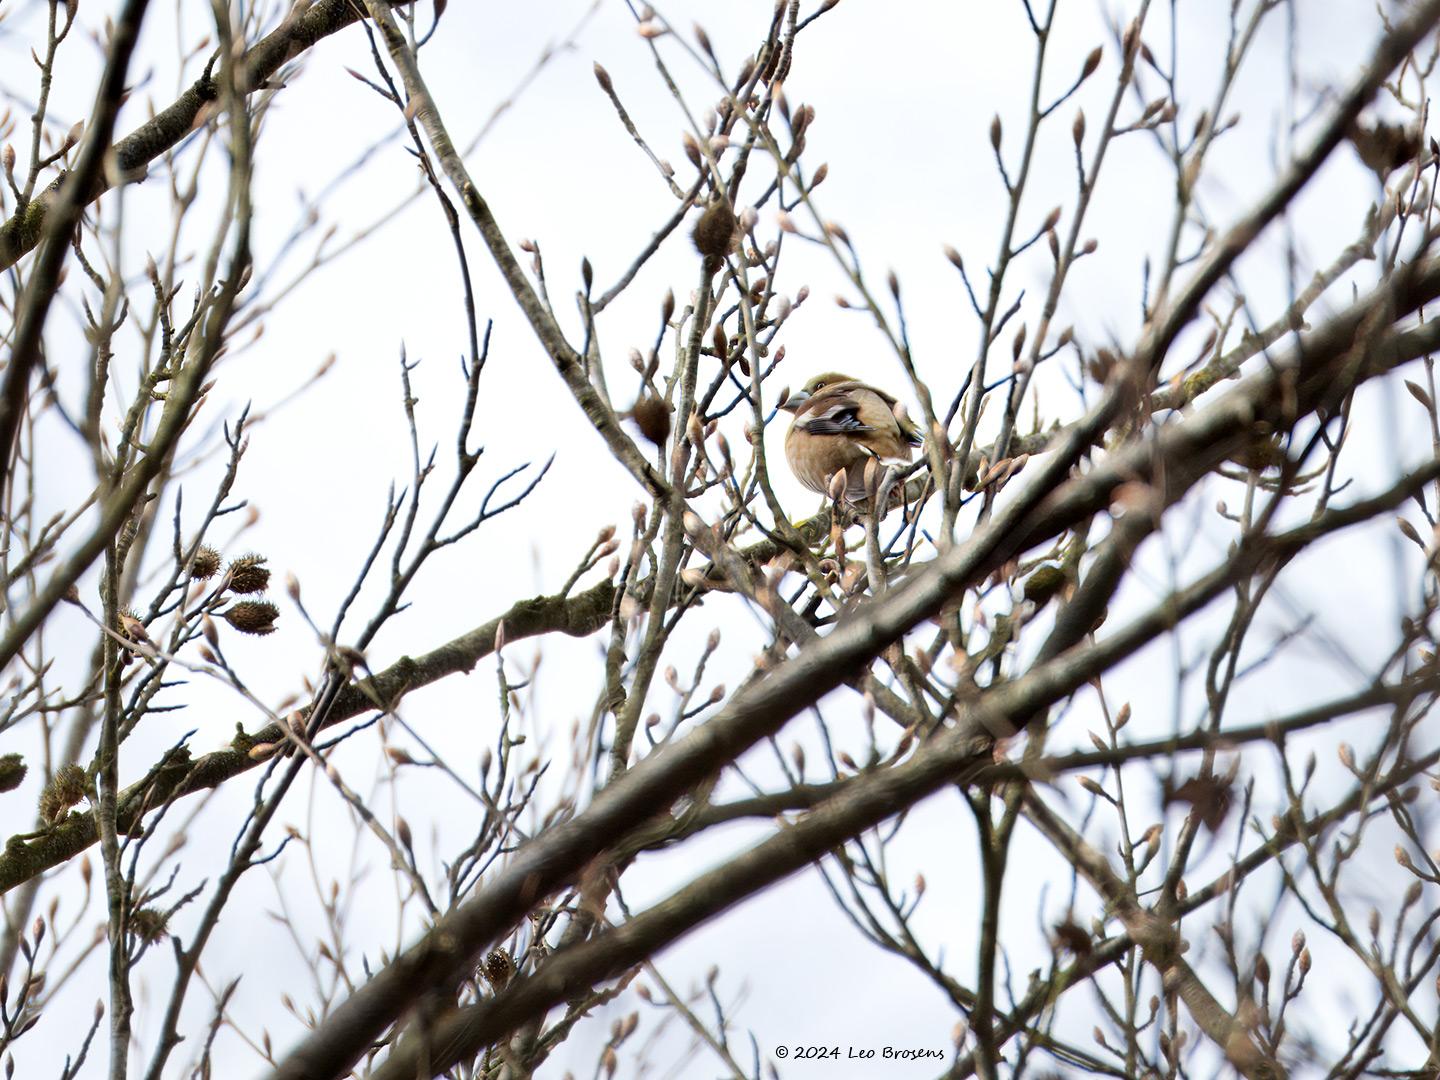 Appelvink-20240329g14401A1A1415atcrfb-Oude-Buisse-Heide.jpg